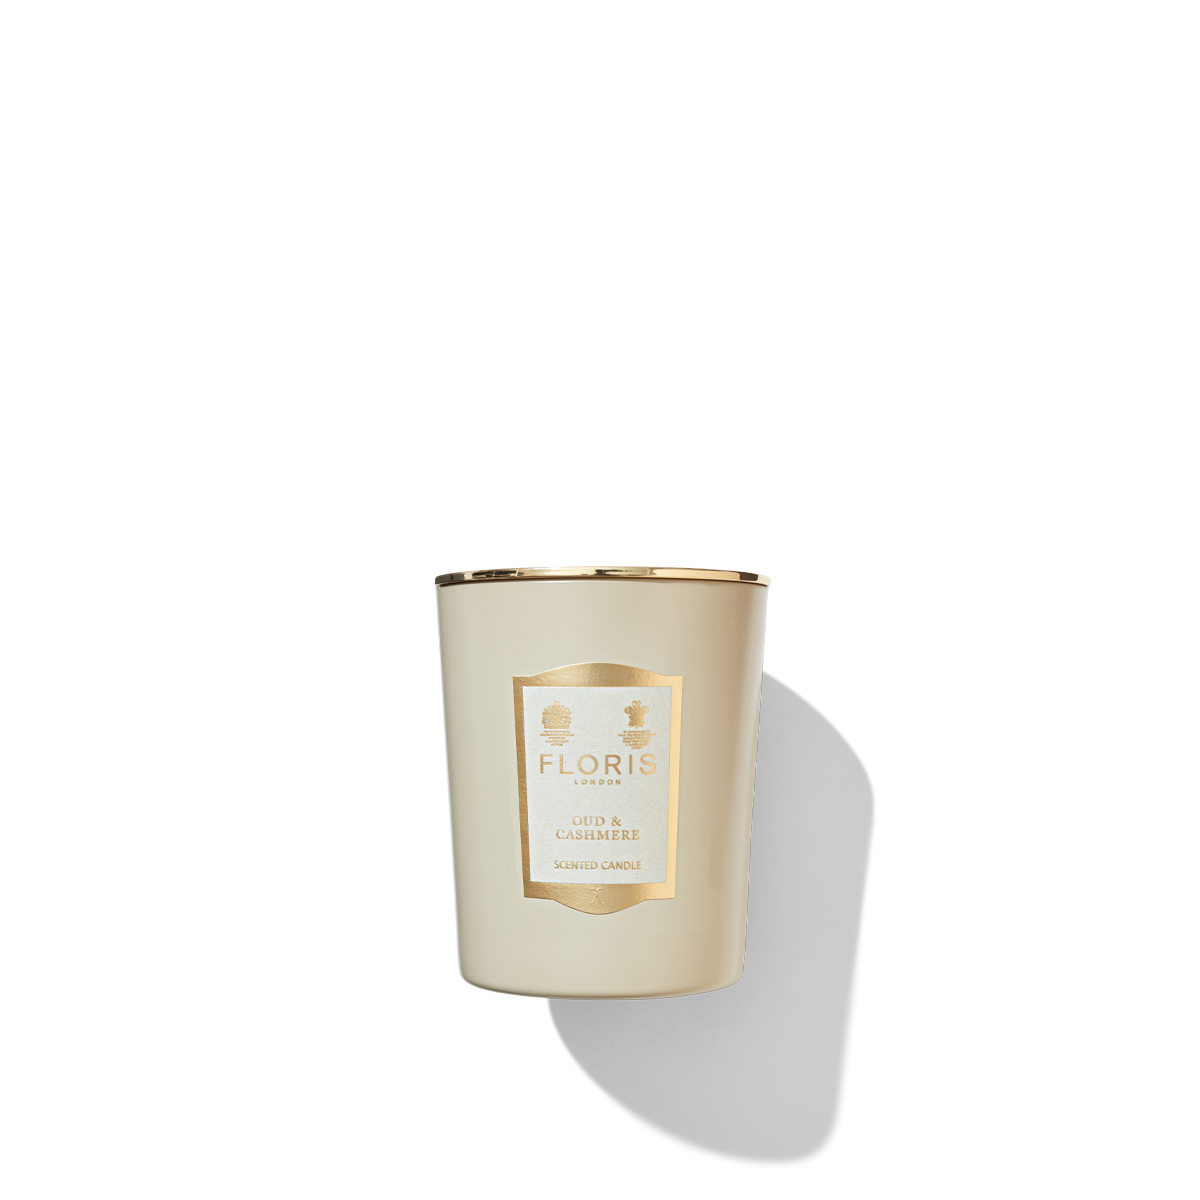 Oud & Cashmere Candle in a round beige matte glass jar, with a cream and gold label and shiny metal gold lid.